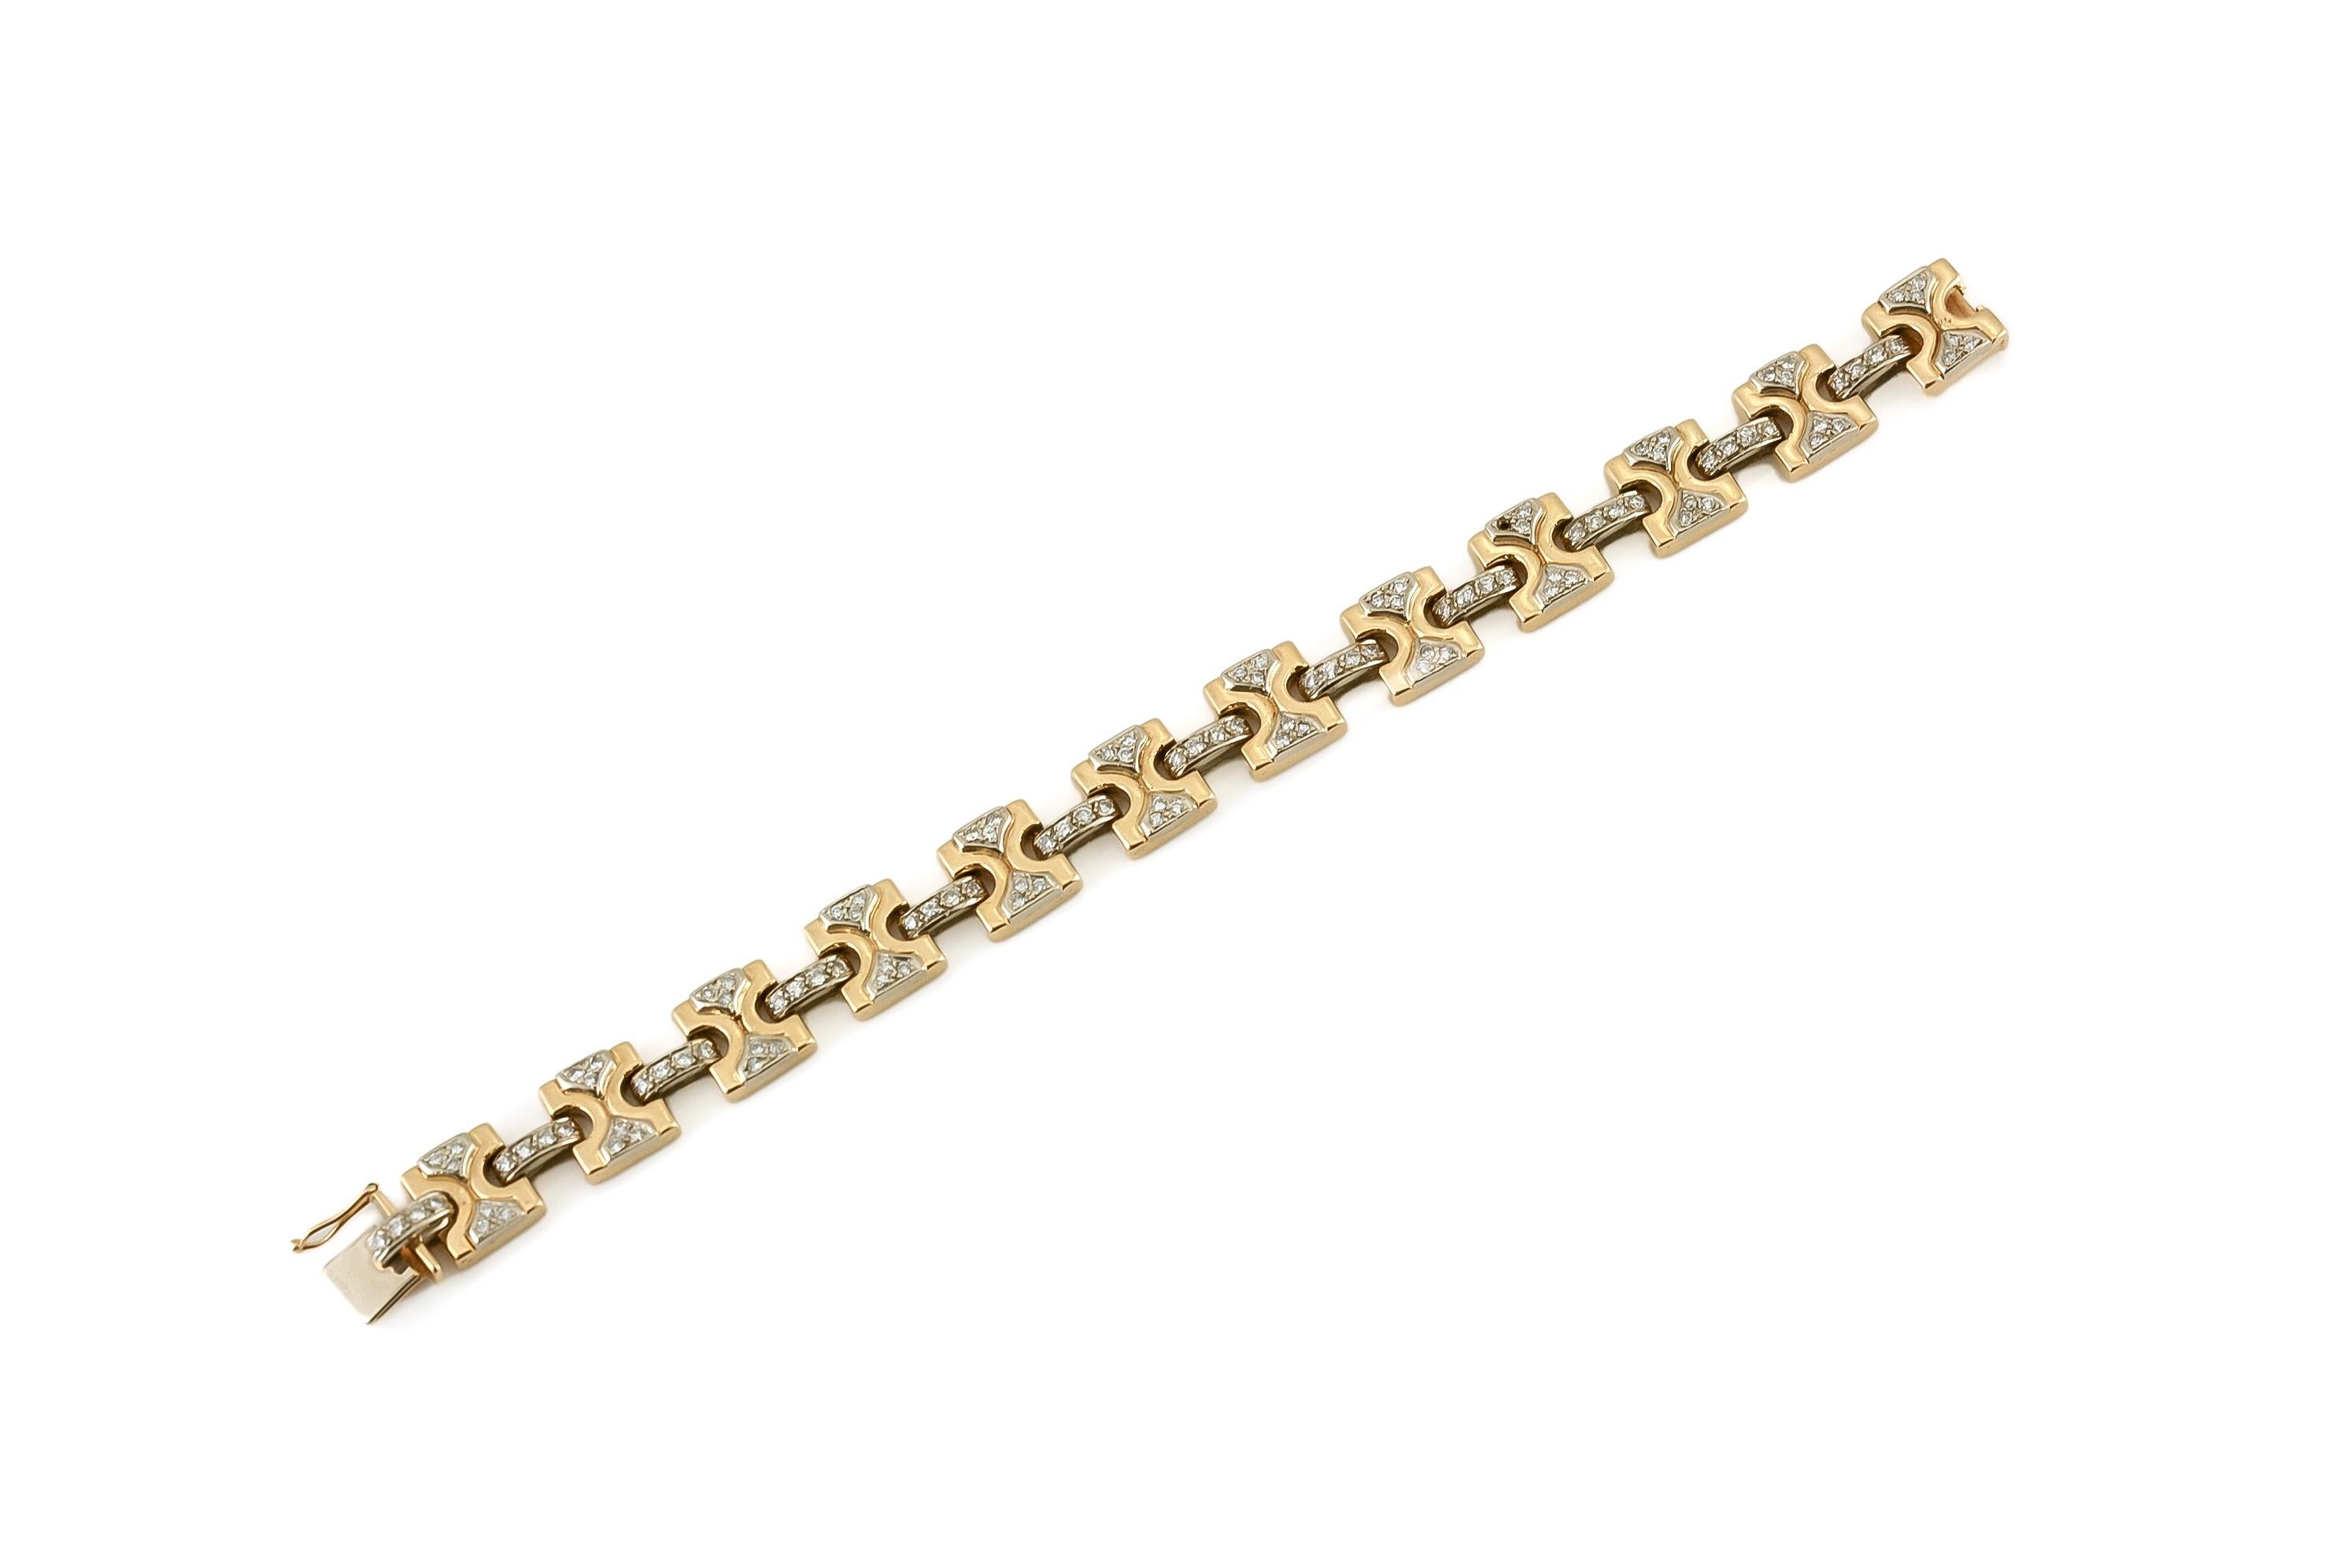 The bracelet is finely crafted in 18k yellow gold with diamonds weighing approxiamtely total of 2.80 carat.
Circa 1980.